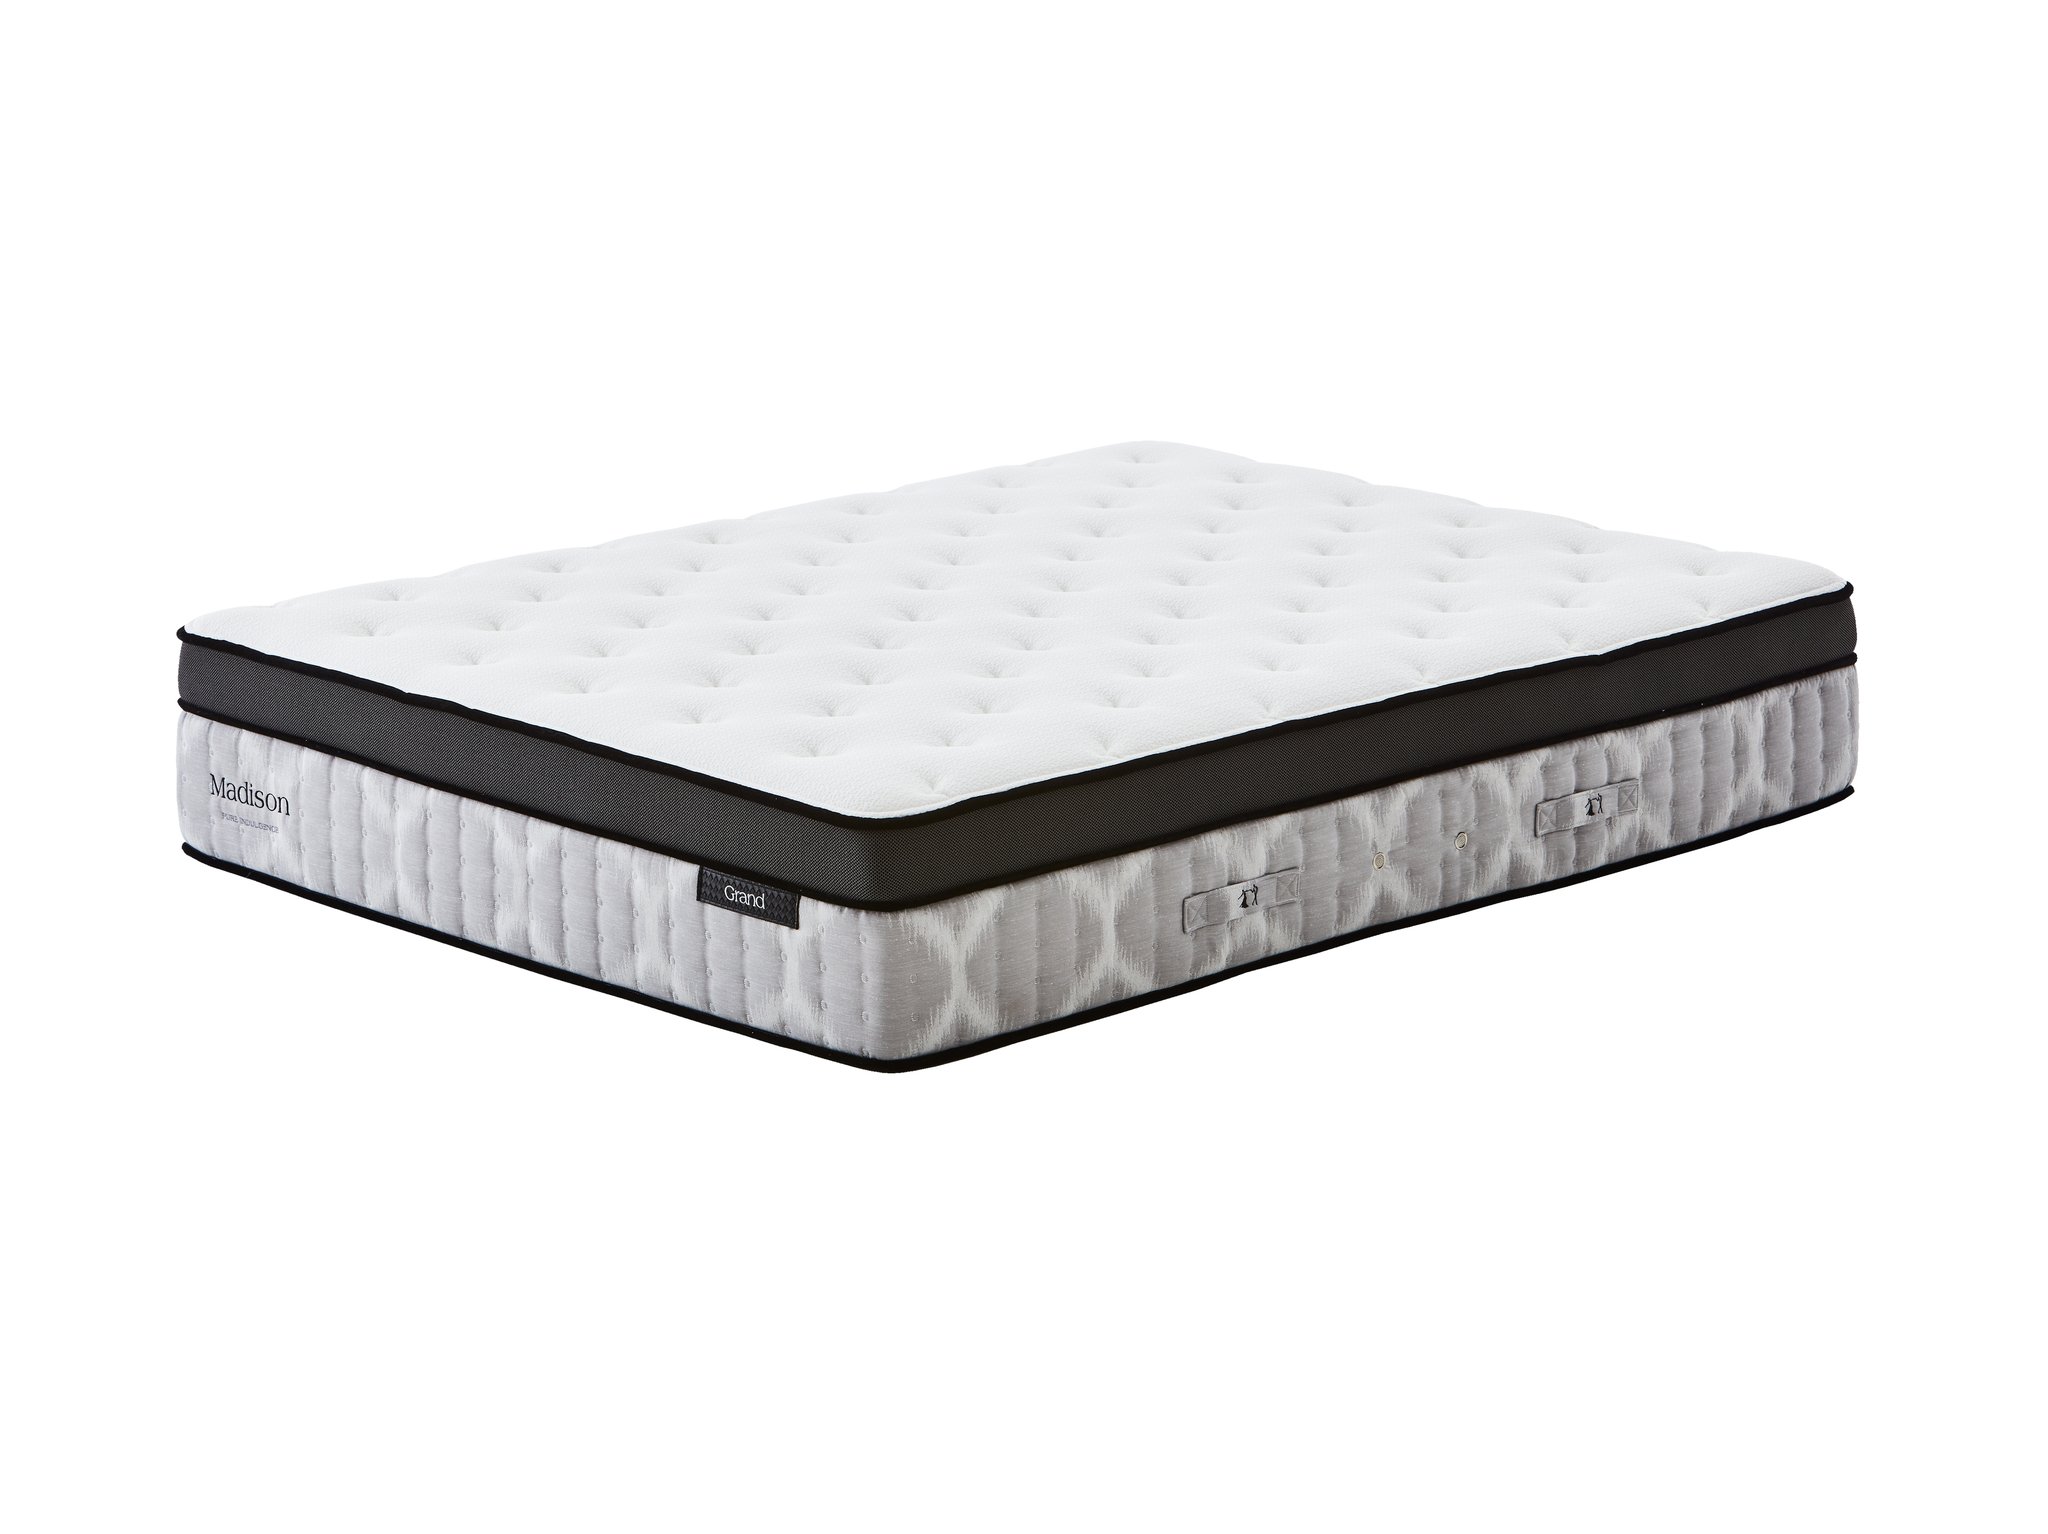 madison grand deluxe mattress review